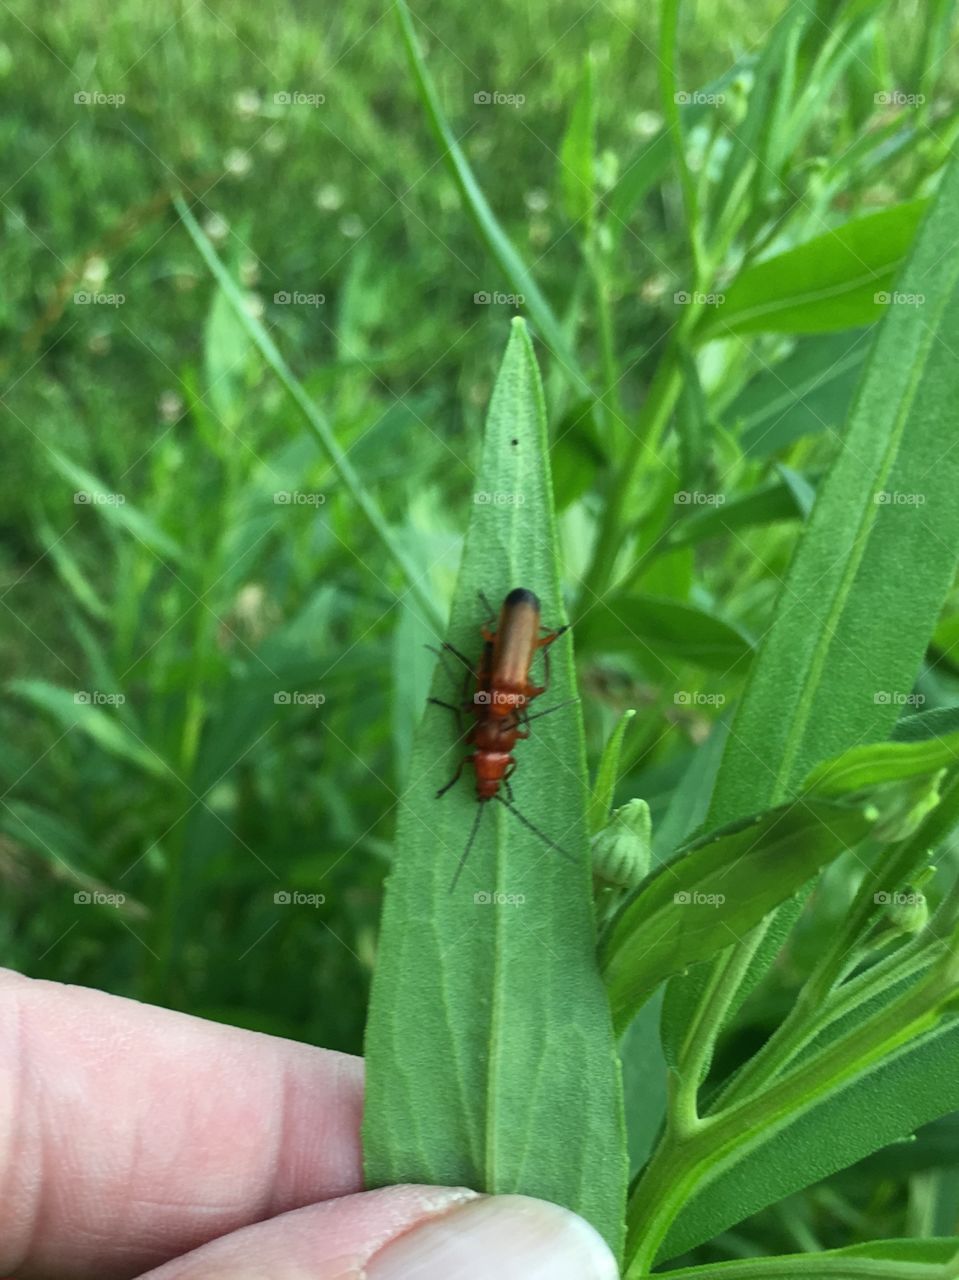 Common red soldier beetles. Can you tell what they’re doing?